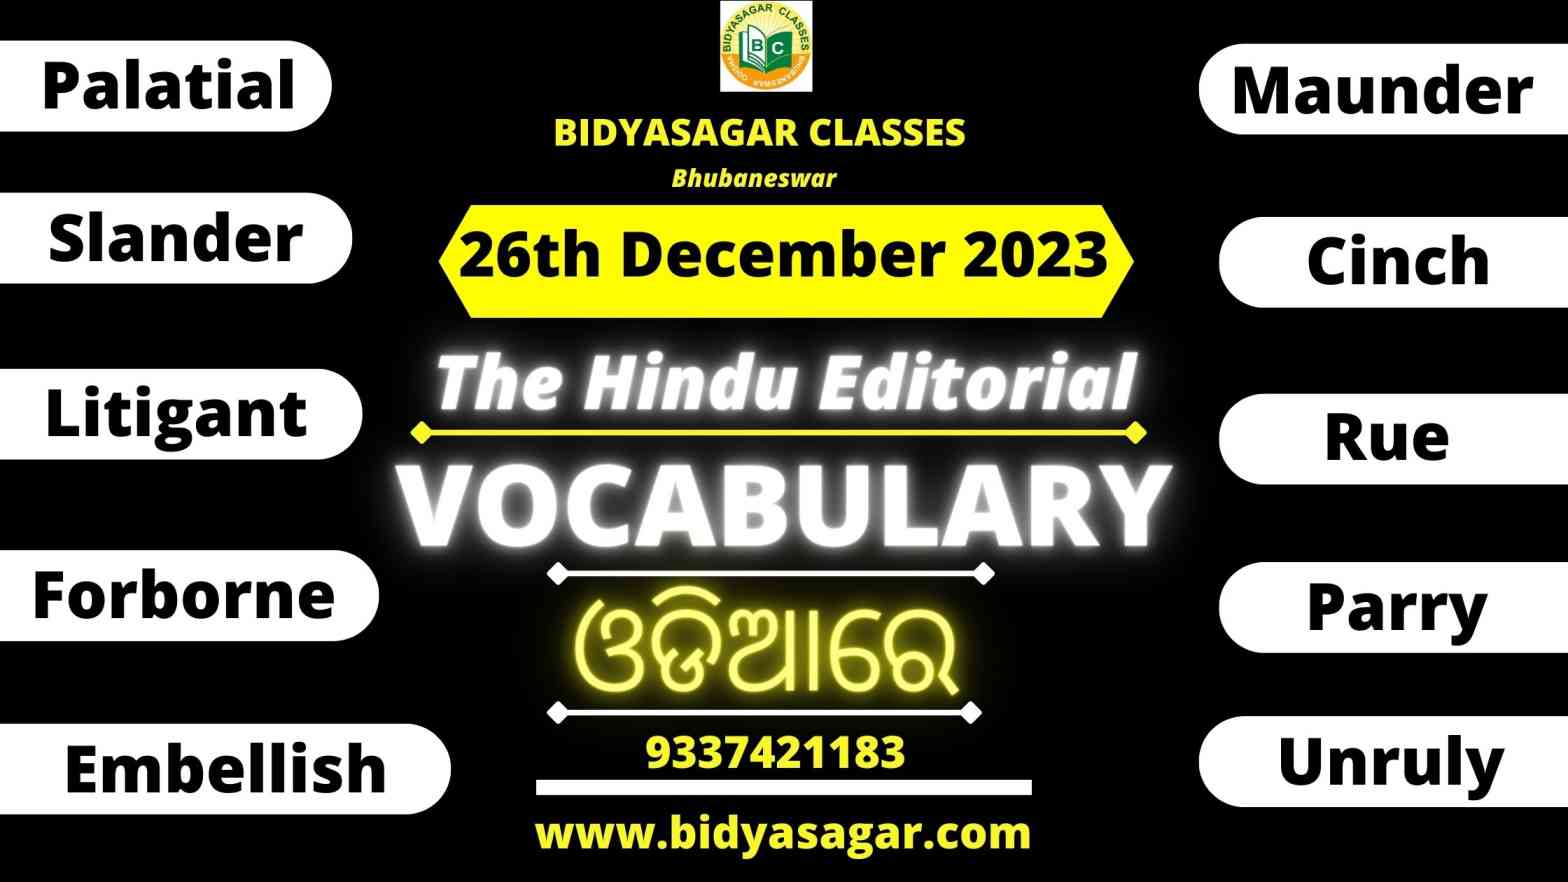 The Hindu Editorial Vocabulary of 26th December 2023